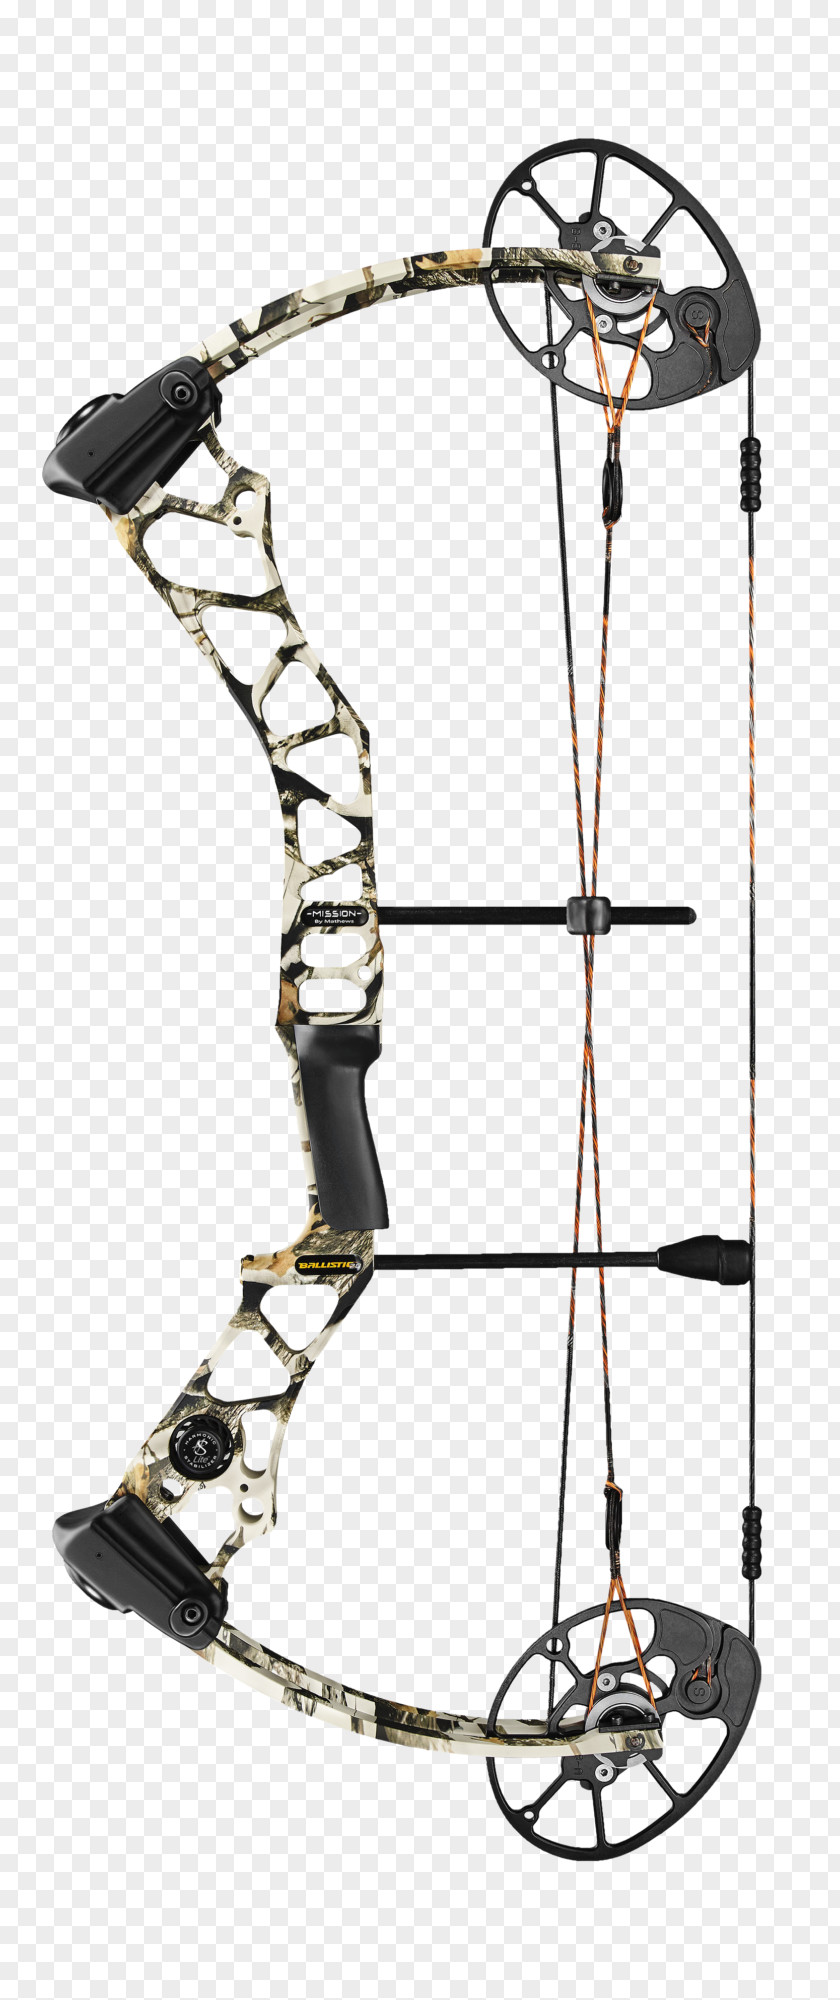 MISSION Bow And Arrow Compound Bows Bowhunting Archery PNG